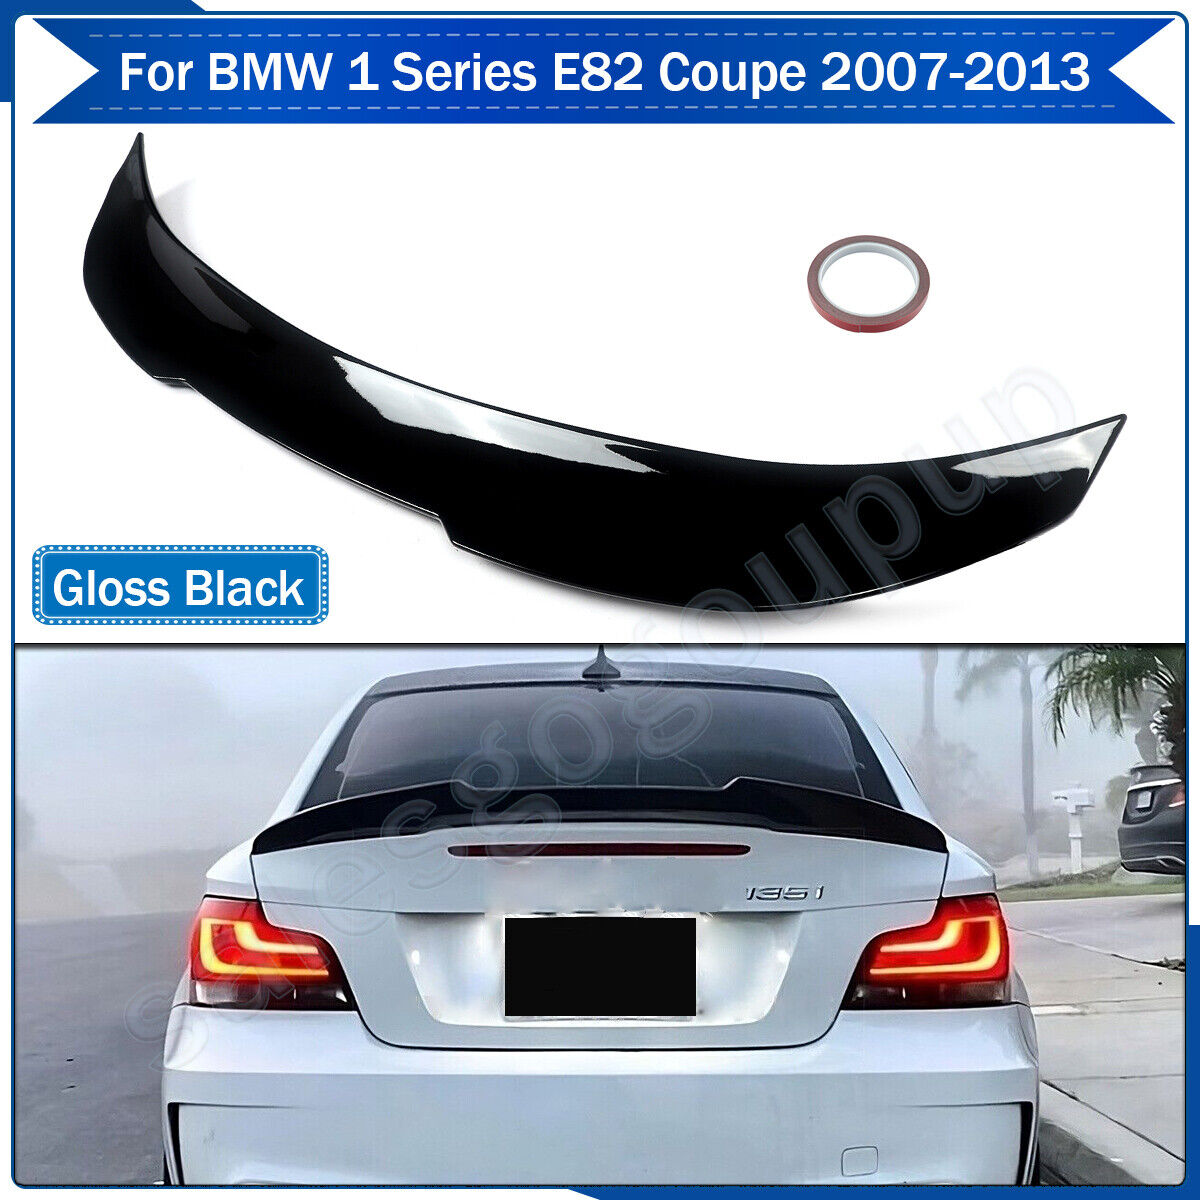 For 2007-13 BMW 1 Series E82 Coupe 128i 135i PSM Style Rear Spoiler Glossy Black